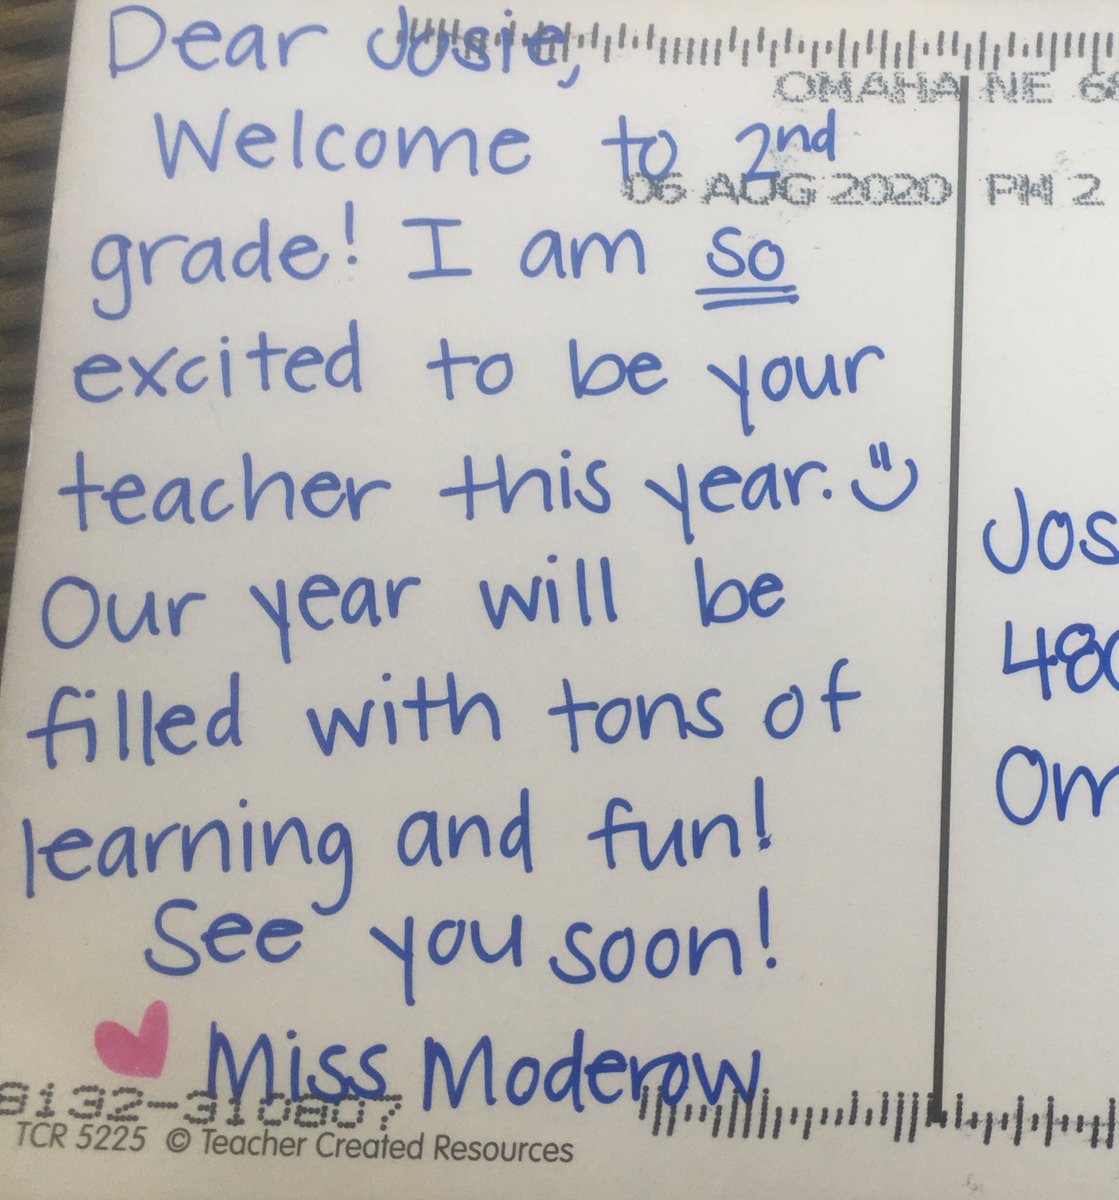 Thank you, Miss Moderow! Josie is so excited to be in your class this year!! #opsproud #dundeeproud @OPSDundee